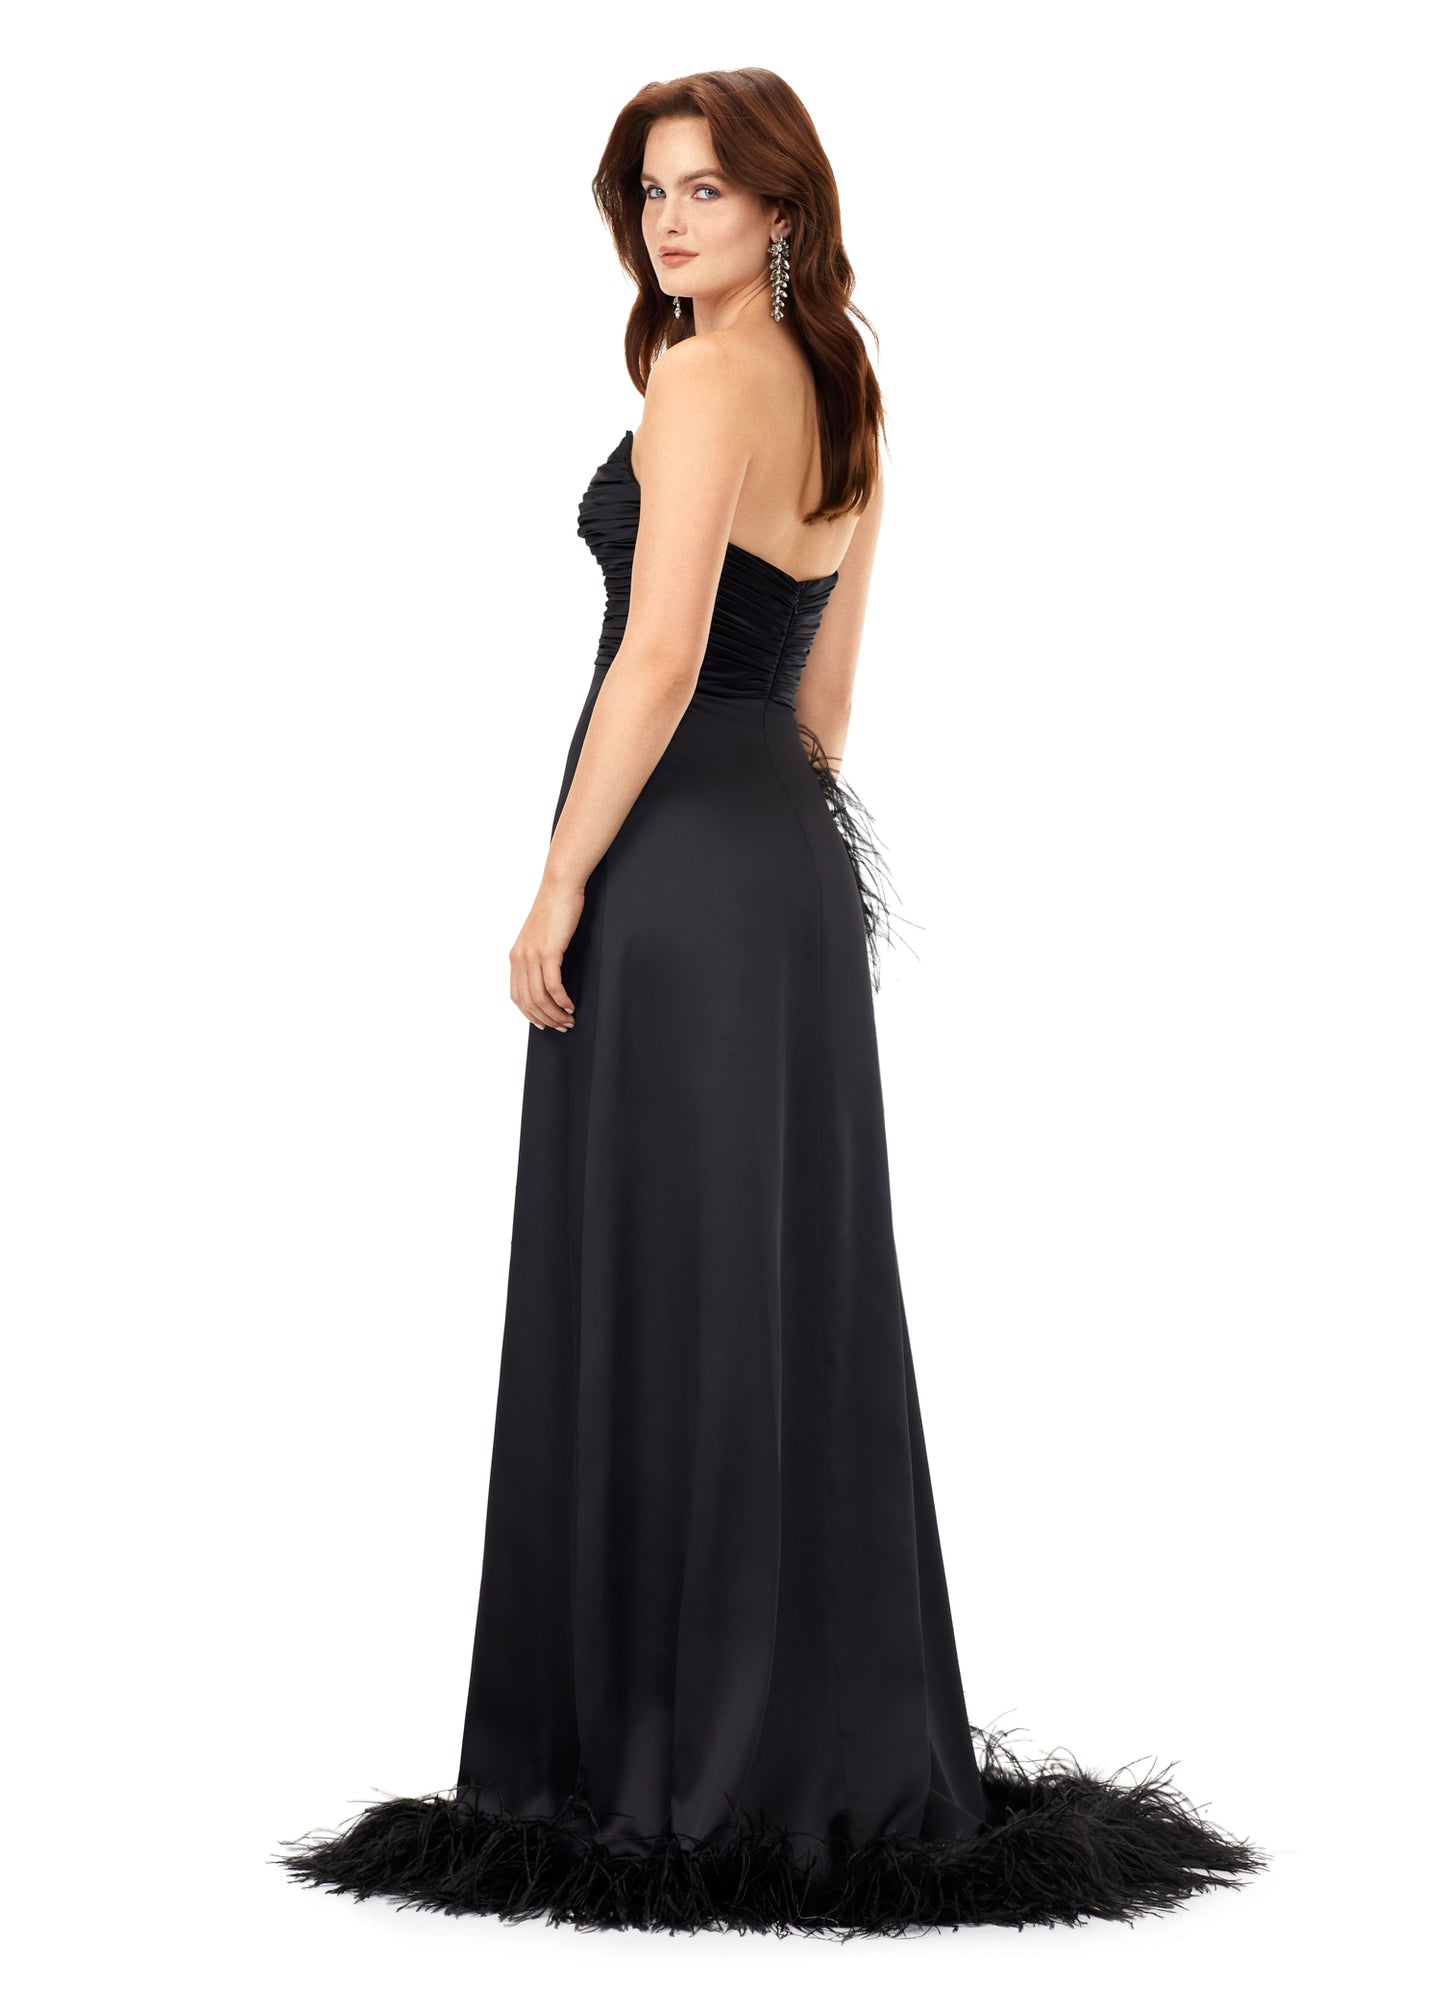 Ashley Lauren 11313 Strapless Ruched Satin Gown with Feathers